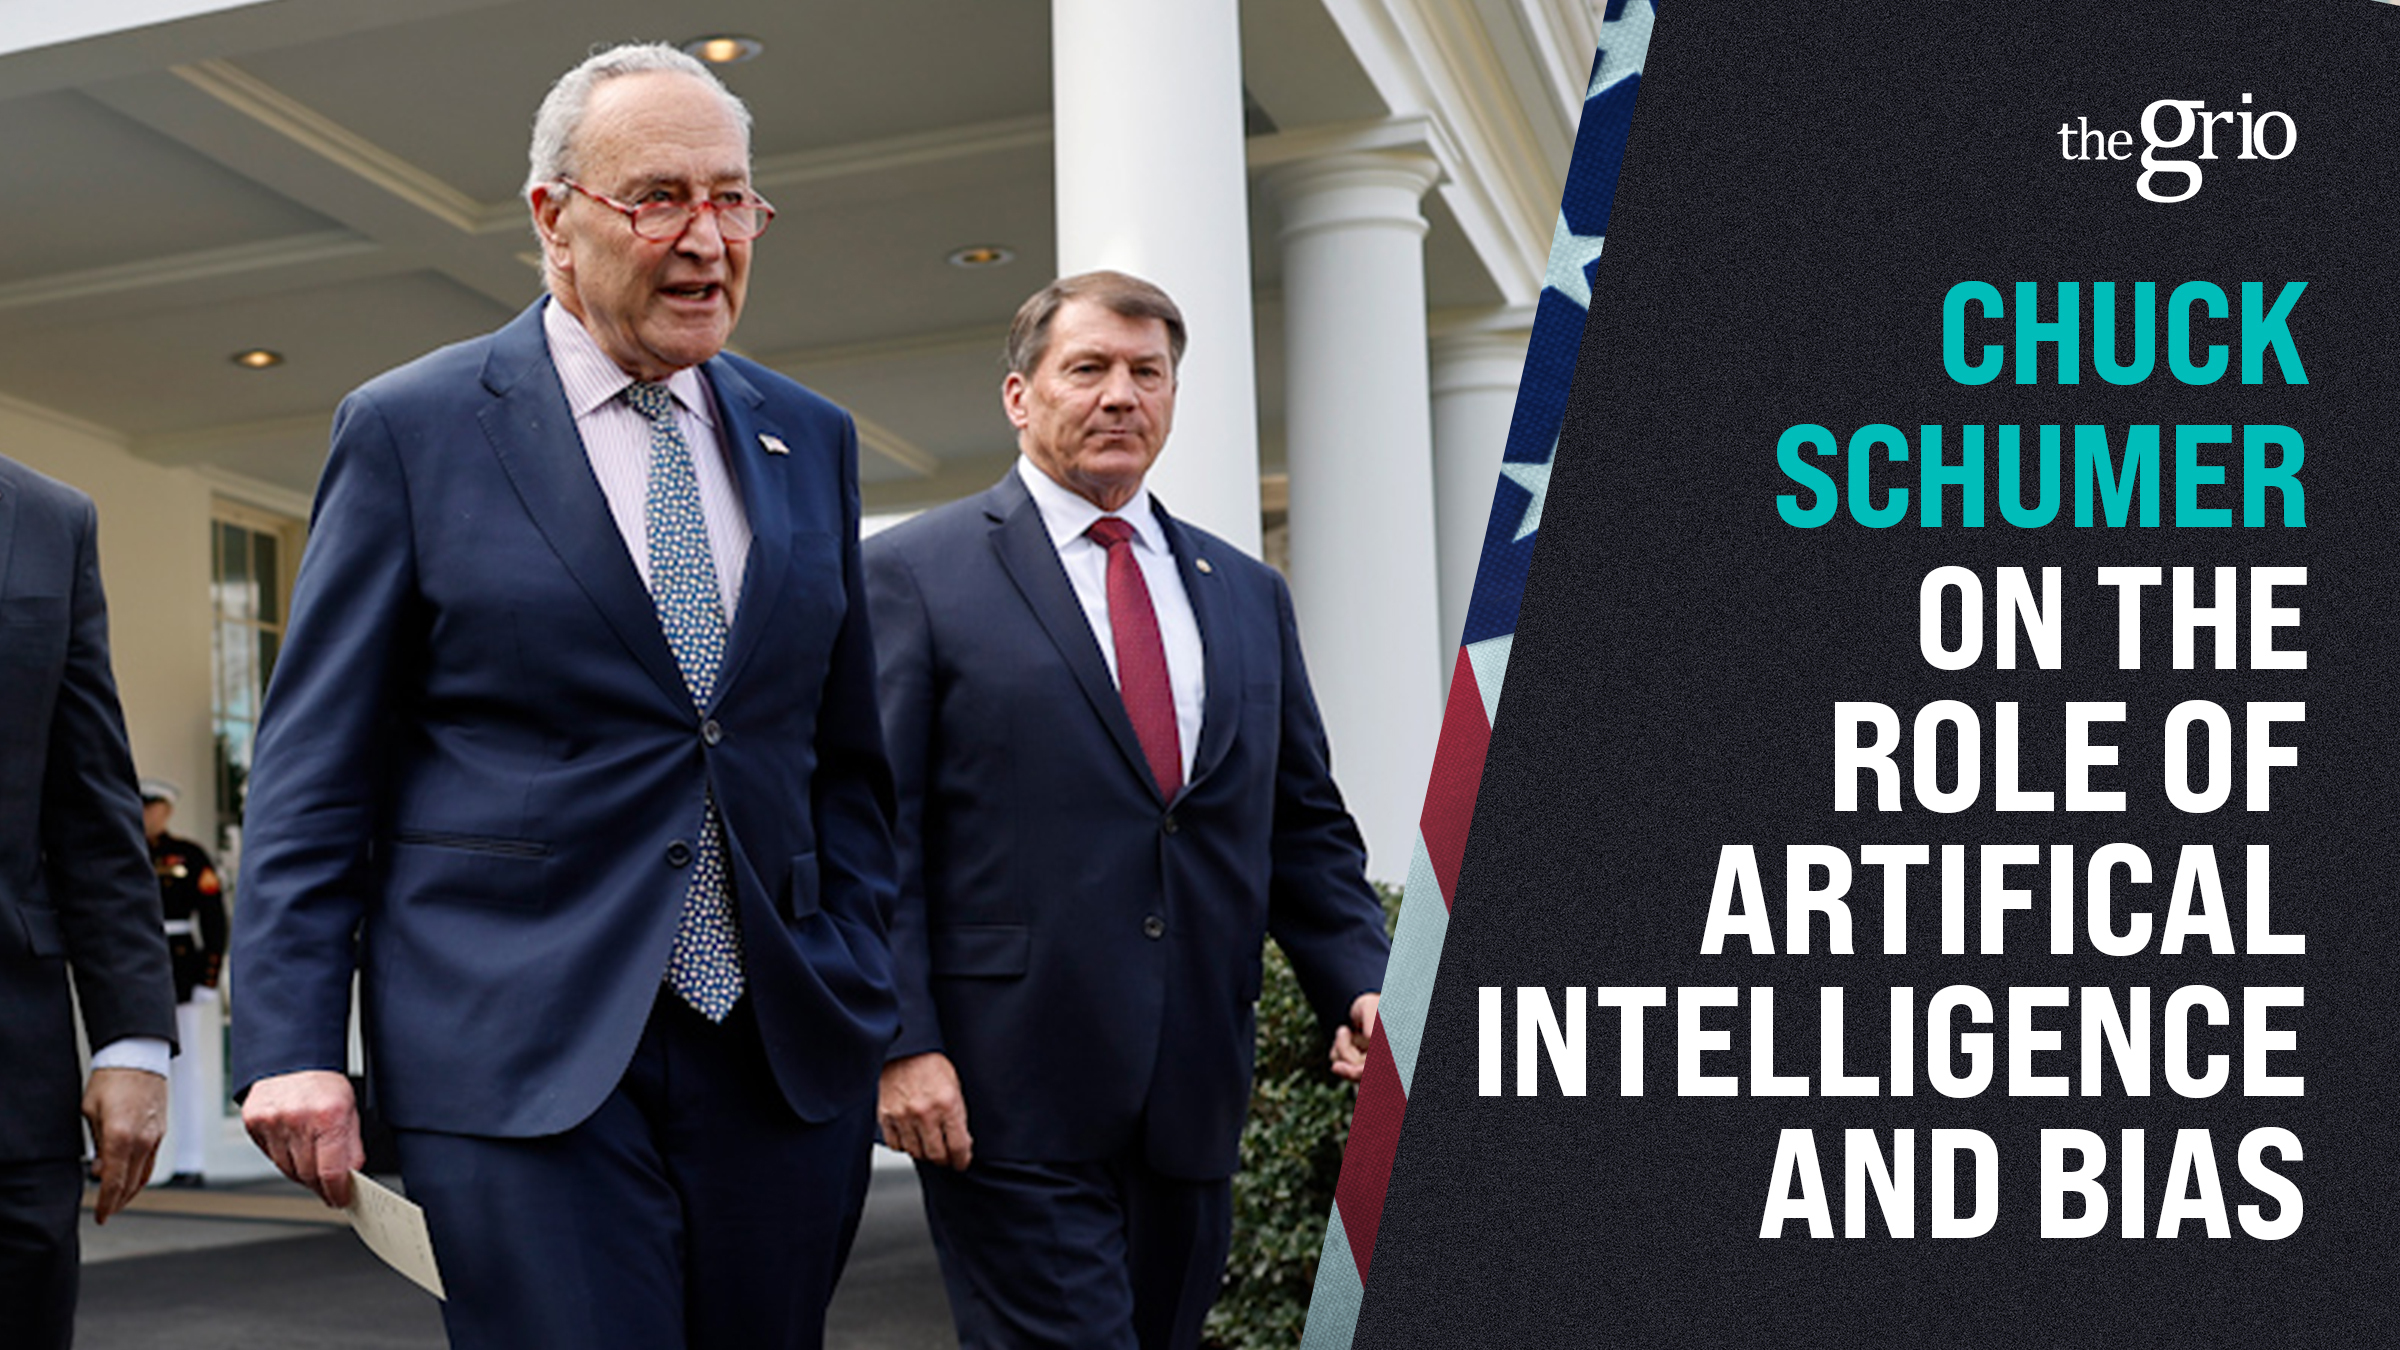 Watch: Senator Schumer on the role of artificial intelligence and bias